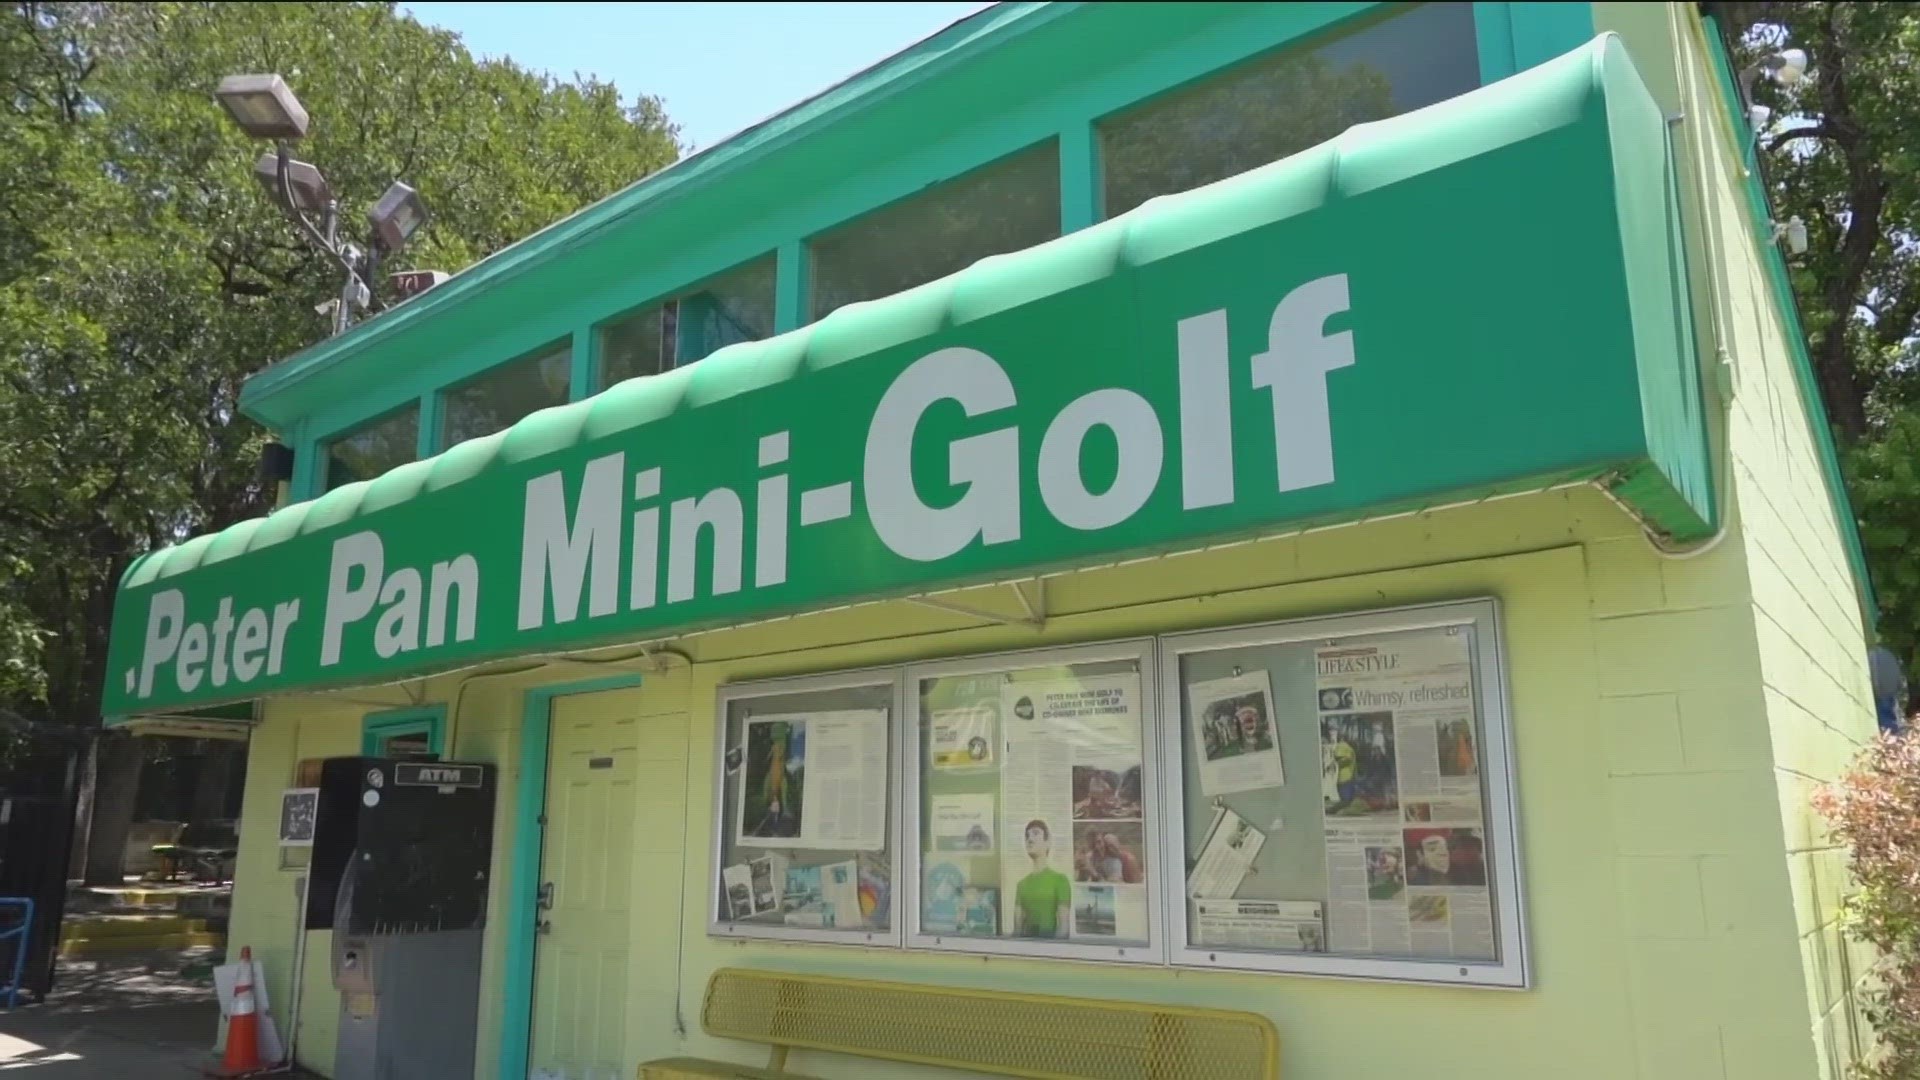 The community is rallying to save an Austin staple, Peter Pan Mini-Golf. Fans launched a petition last month in hopes of saving the business.